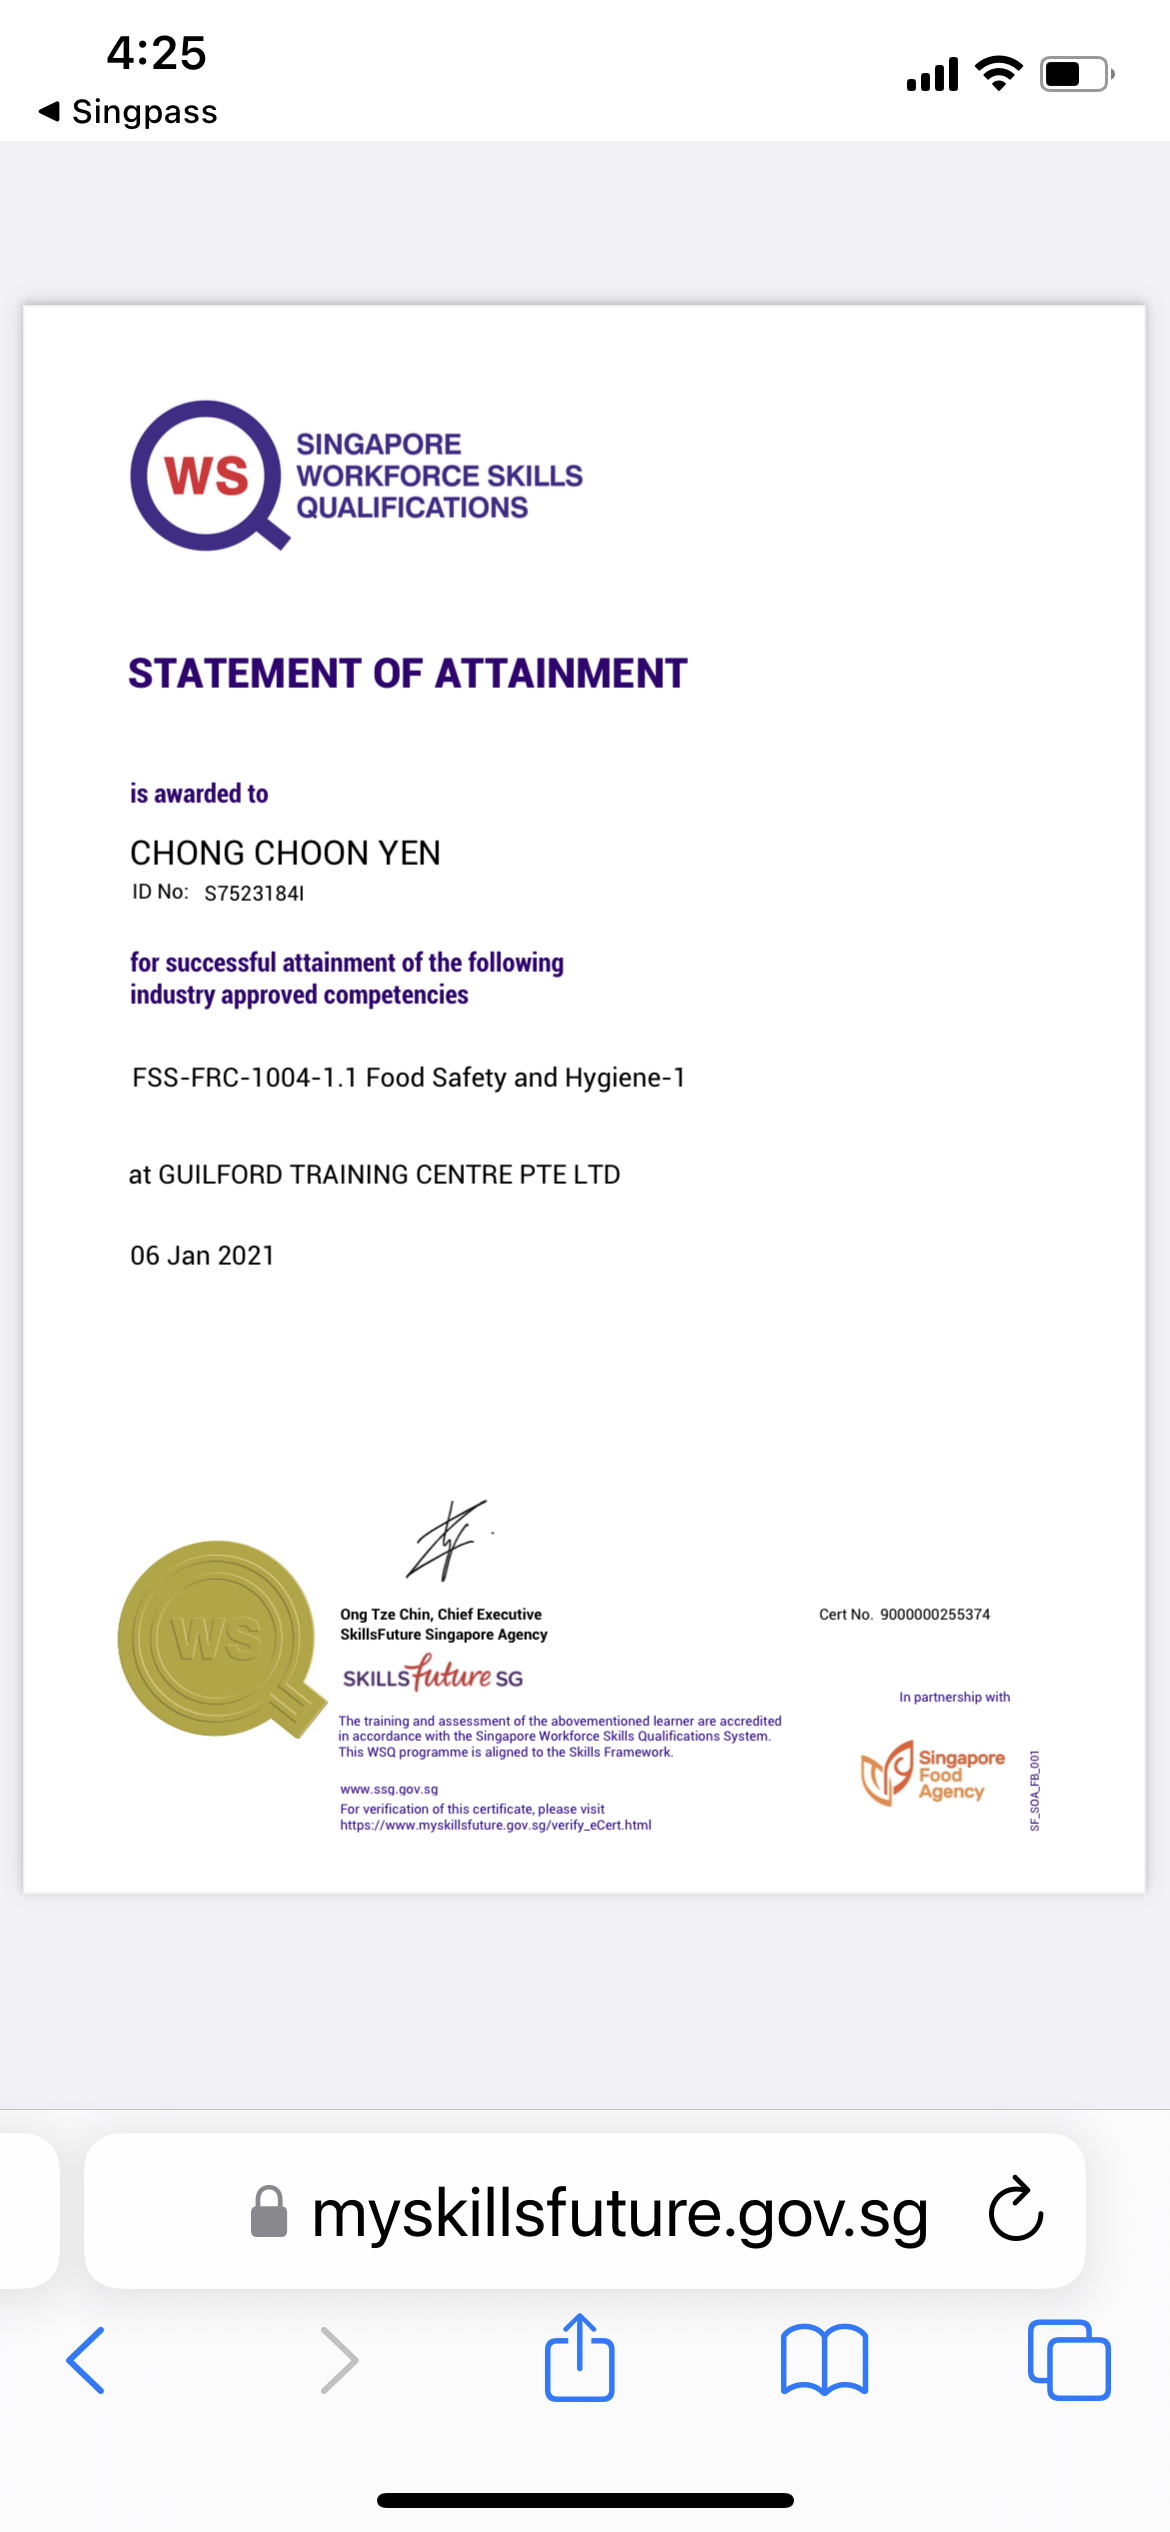 4:25

4 Singpass

al FT @)

SINGAPORE
WORKFORCE SKILLS
QUALIFICATIONS

STATEMENT OF ATTAINMENT

is awarded to

CHONG CHOON YEN

ID No: §75231841

for successful attainment of the following
industry approved competencies

FSS-FRC-1004-1.1 Food Safety and Hygiene-1

at GUILFORD TRAINING CENTRE PTE LTD

06 Jan 2021

#

Ong Tze Chin, Chief Executive Cert No. 9000000256374
SkillsF uture Singapore Agency

SKILLS SG

In partner shep with

 

The tramung and assessment of the sbovementoned learner are accredited
1 accordance wih the Singapore Workiorce Skills Quakfications System

Tos WS ogame 5 seped 1 the Sums Framemor 4 Singapore
Fons

ru.001

www 33G Gov 50
For verification of thus certificate. please visit
Nitps./ were mysiilstuture Gov 3g/verify_eCert hrm

Agency

5.50

& myskillsfuture.gov.sg C
< Mh Mm